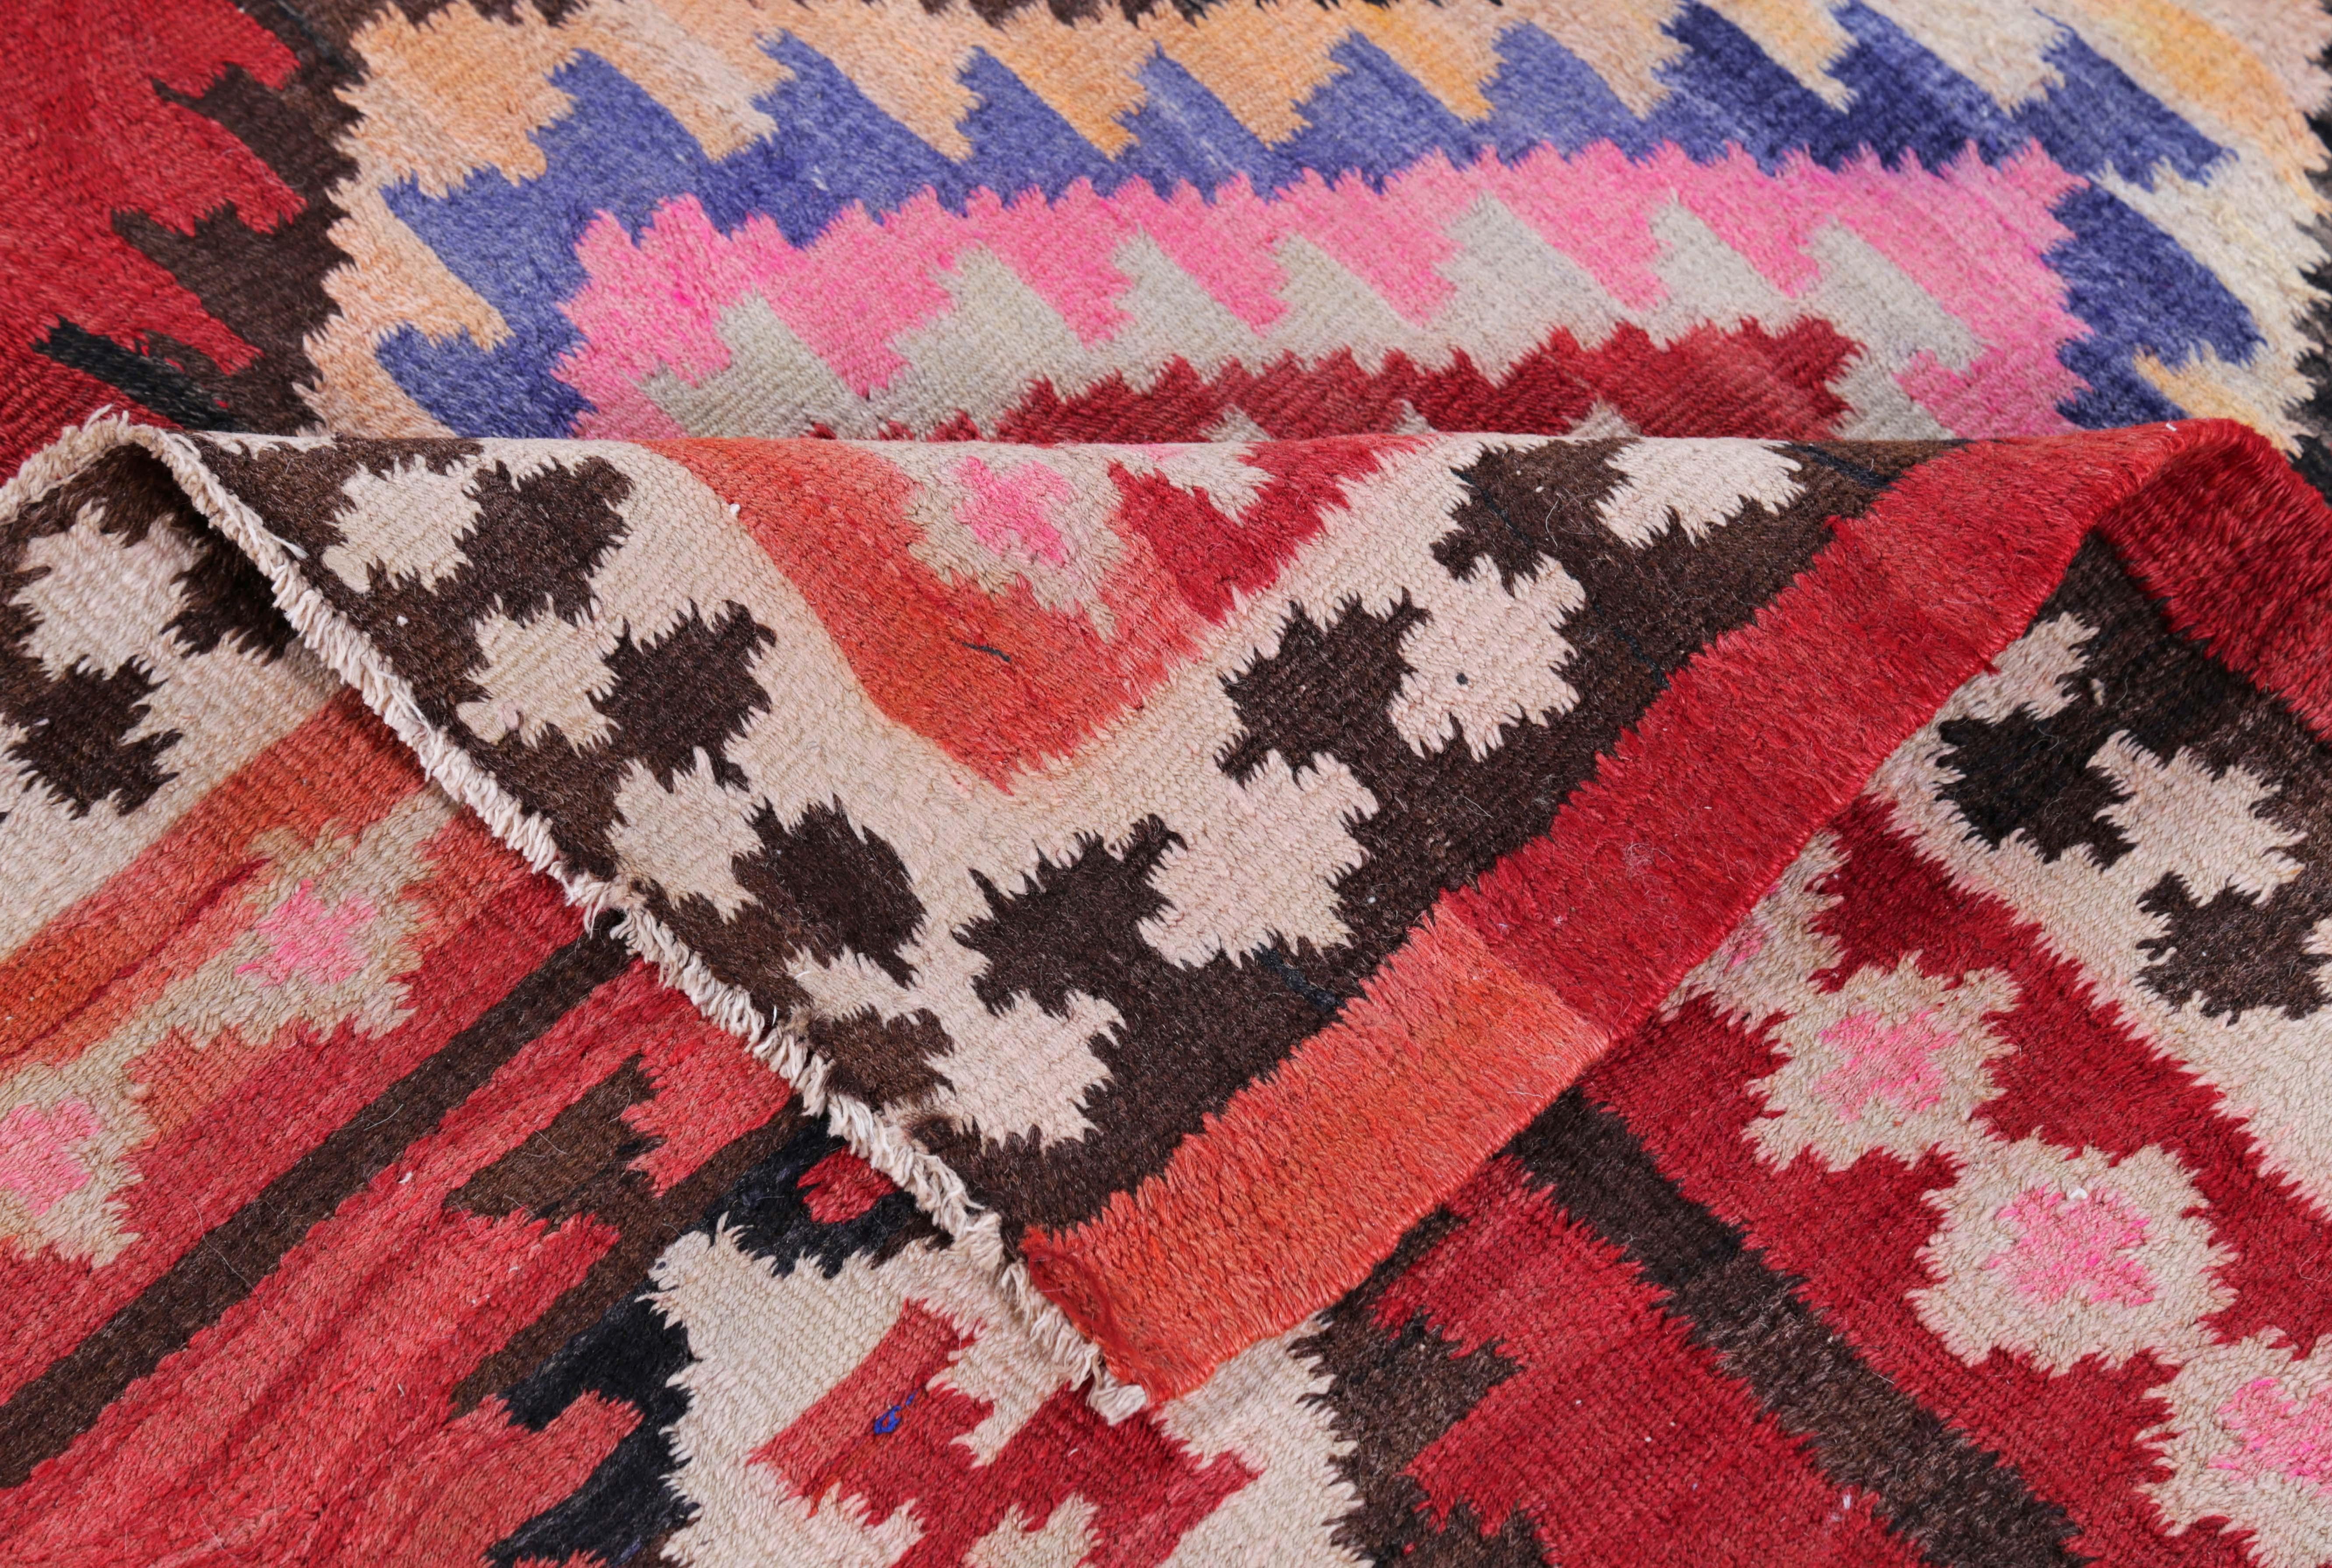 Turkish Kilim Runner Rug with Red, Pink and White Diamond Pattern In New Condition For Sale In Dallas, TX